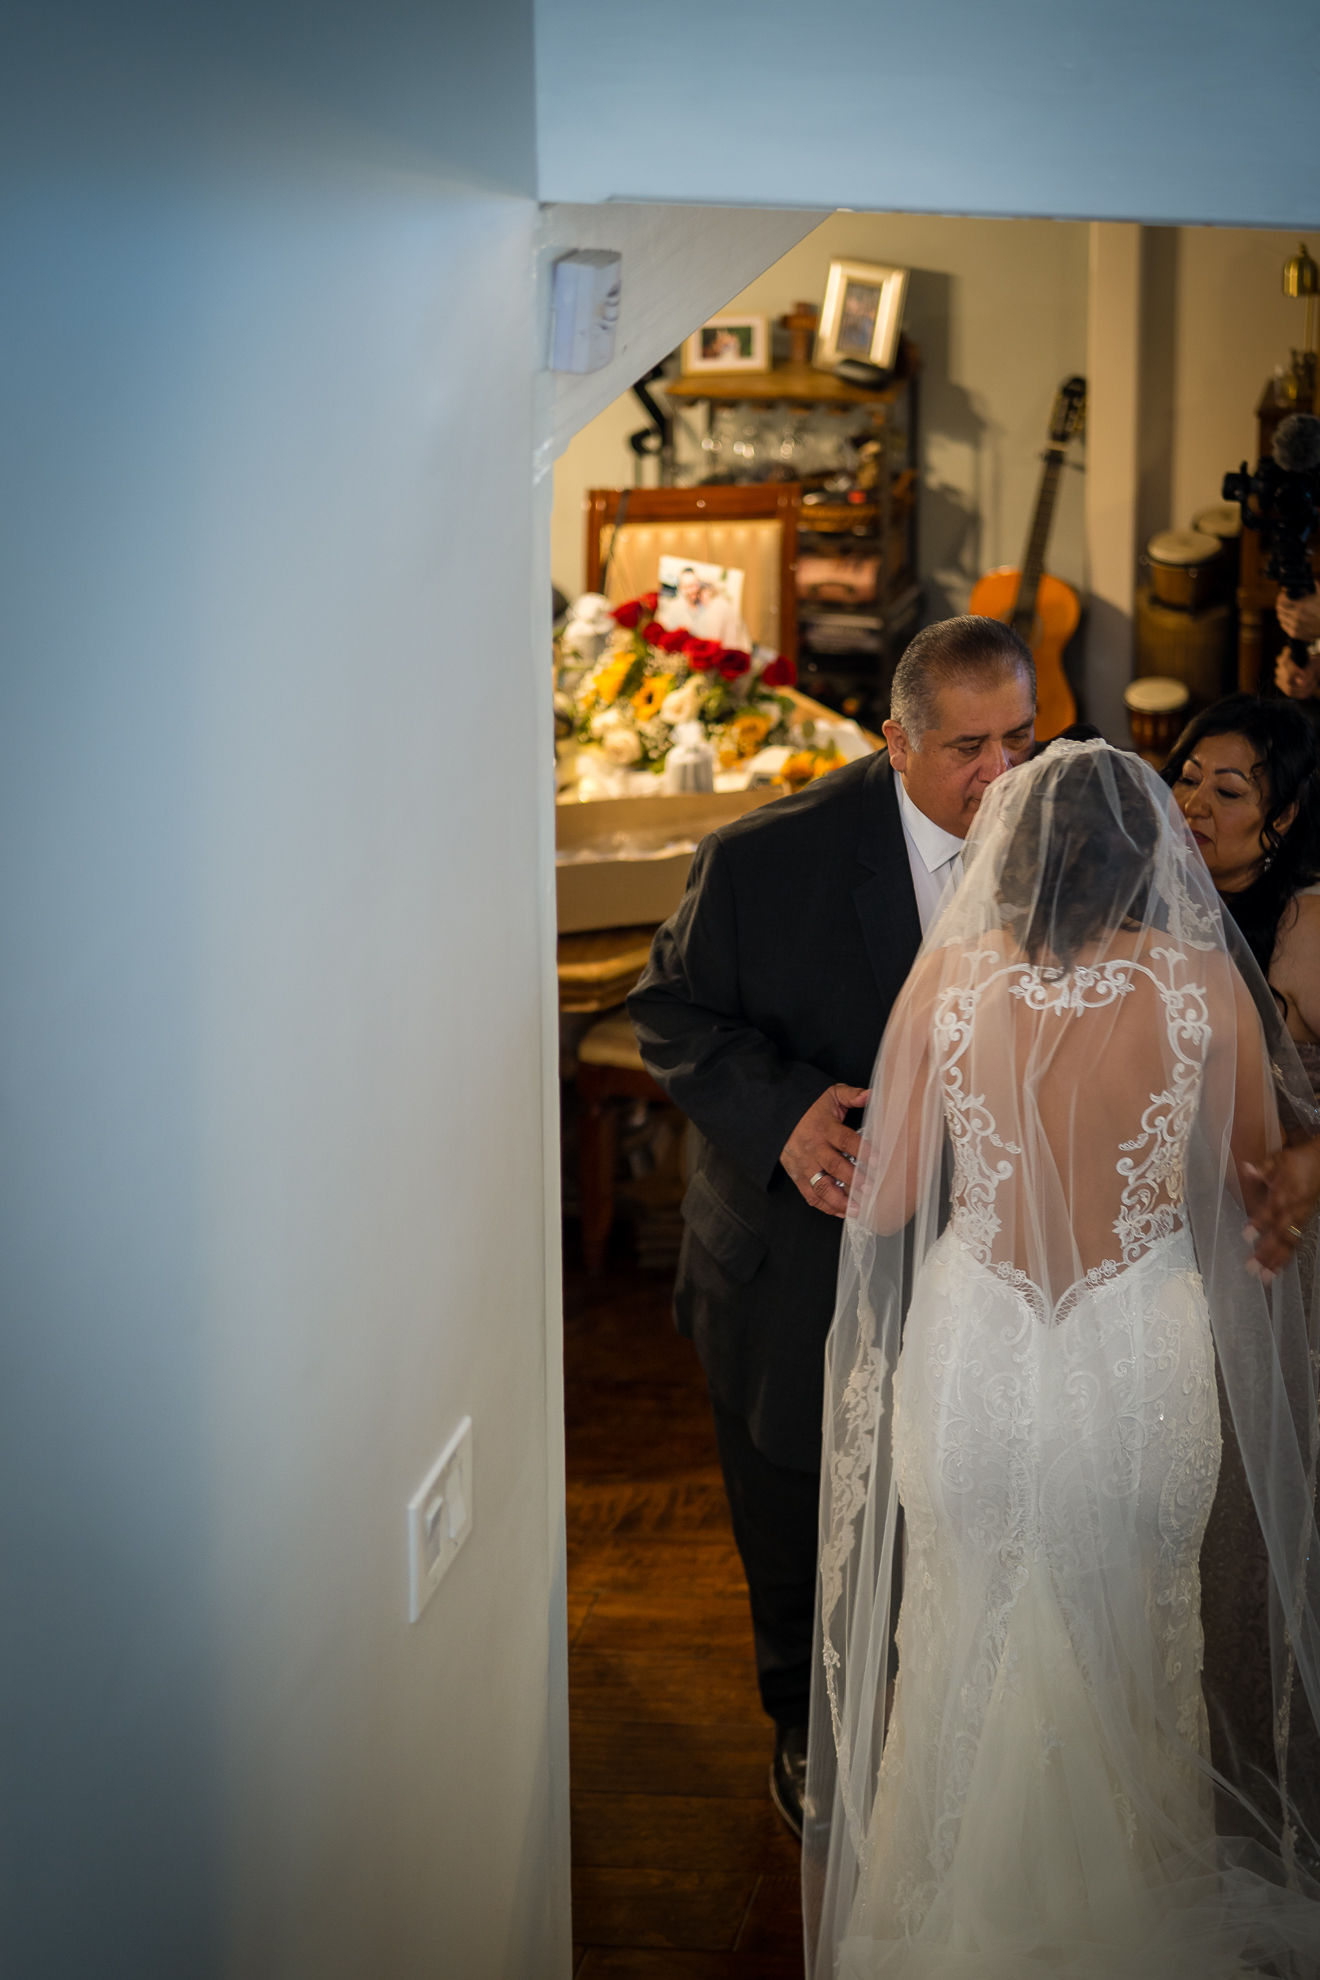 ThomasKim_photography A bride walks down the hallway with her father during a special occasion.